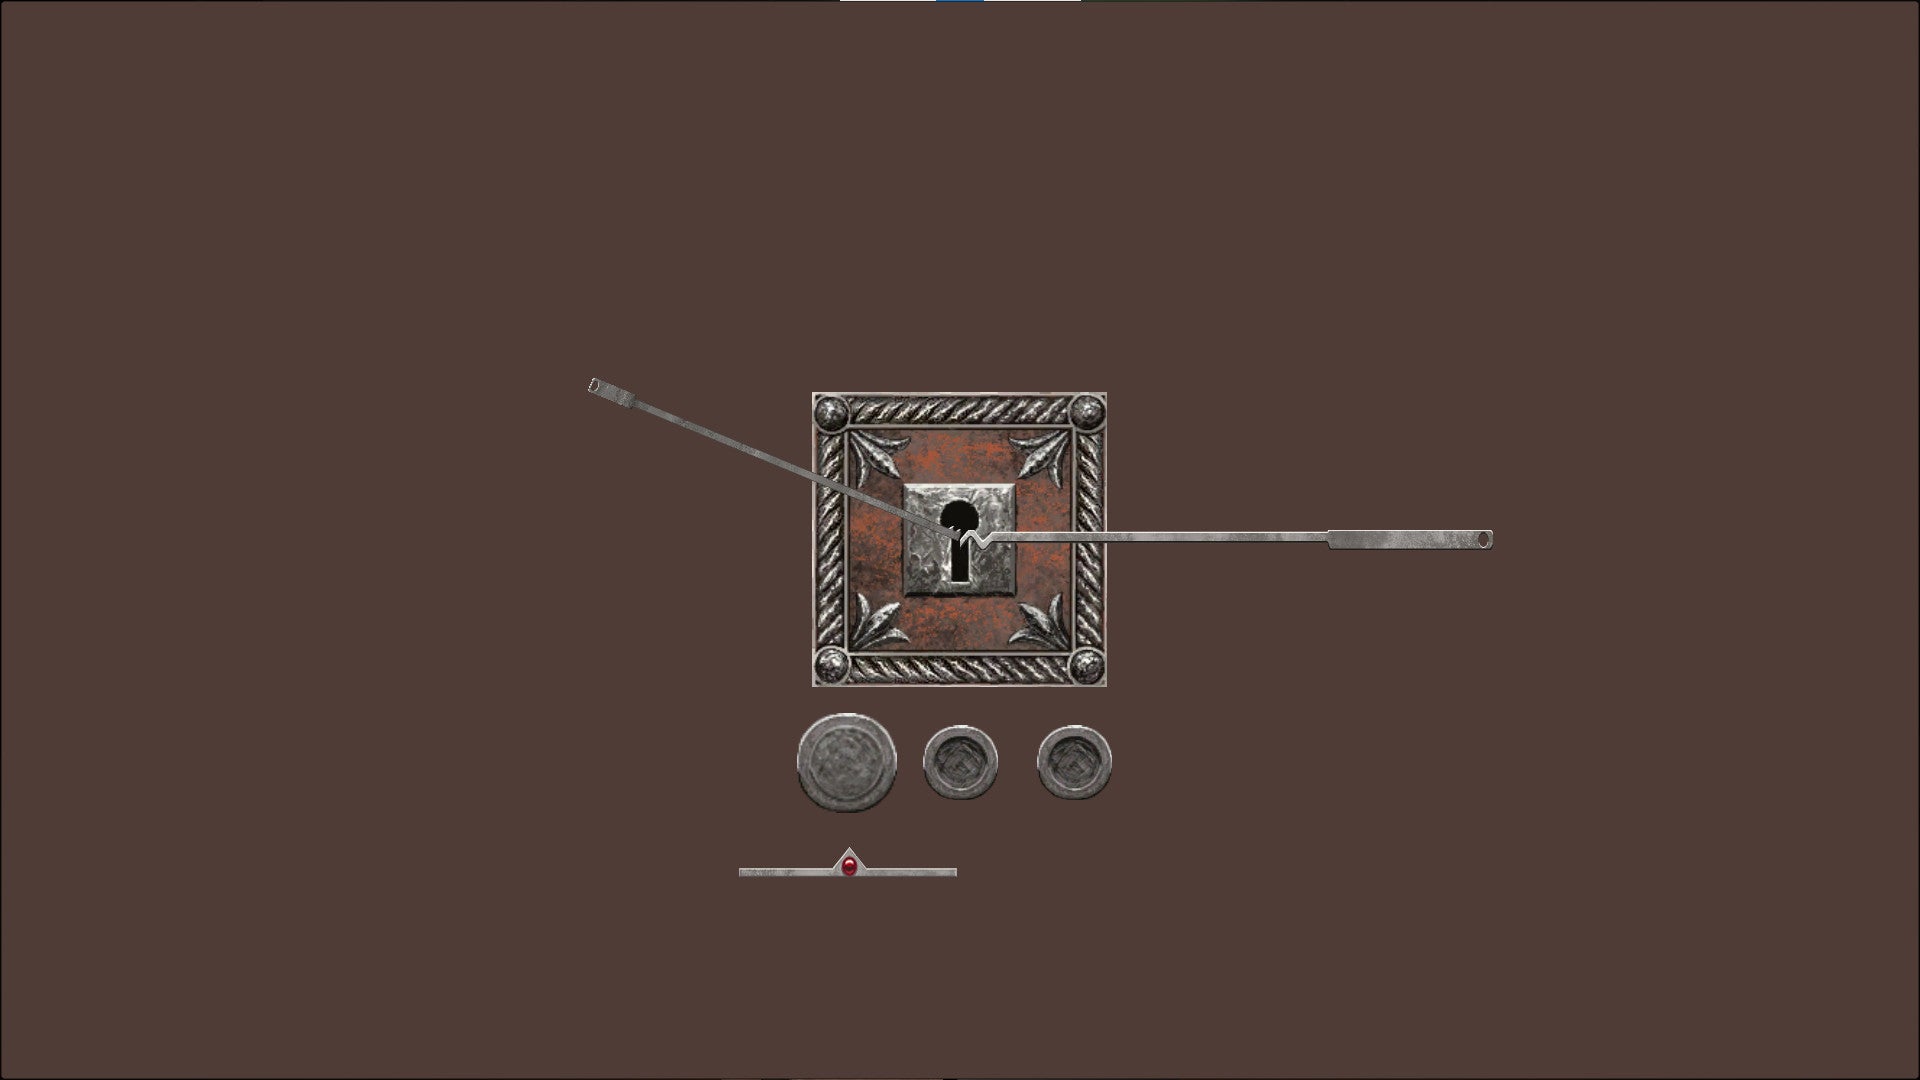 A screenshot of Museum Of Mechanics: Lockpicking, showing one of the included lockpicking minigames in action.